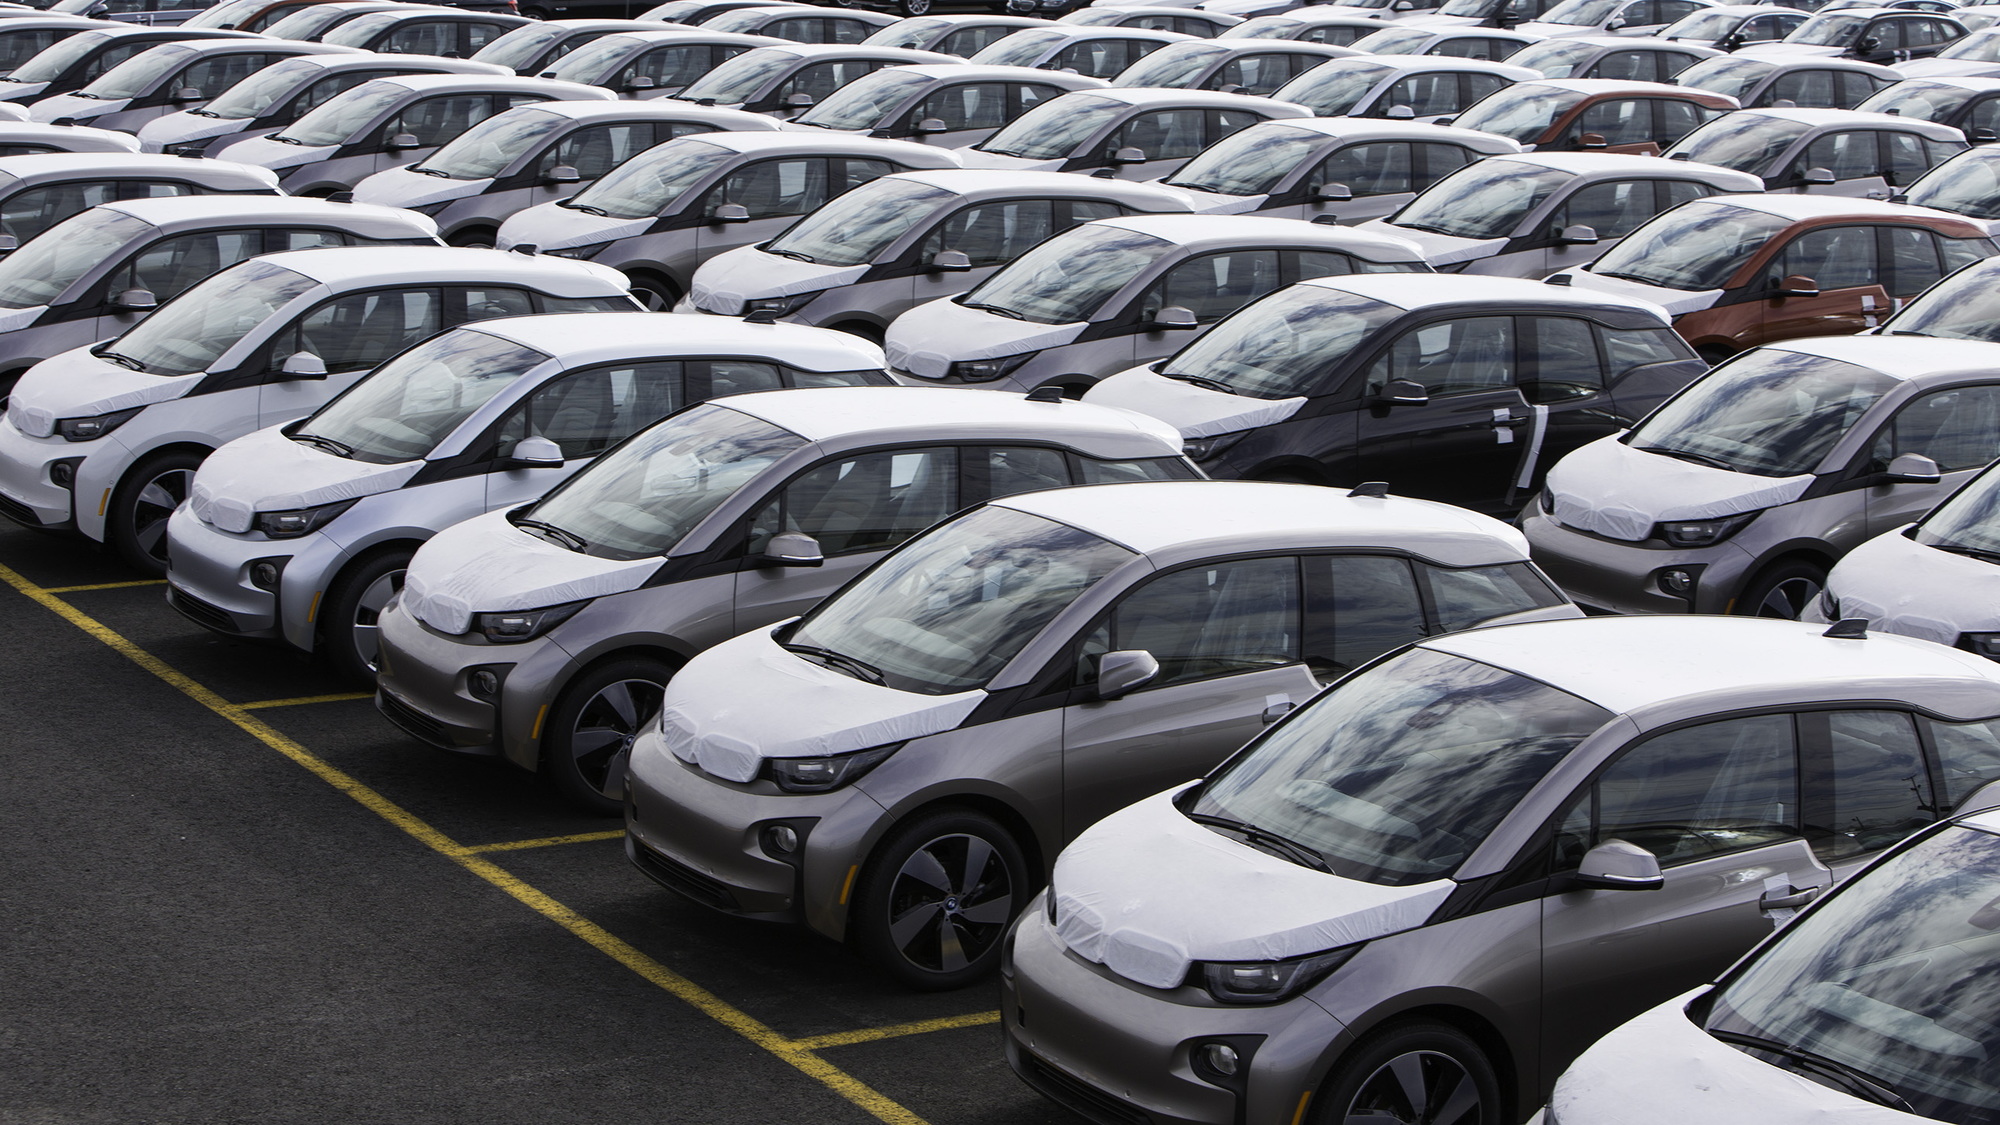 2014 BMW i3 electric cars waiting at East Coast shipping port for distribution, May 2014